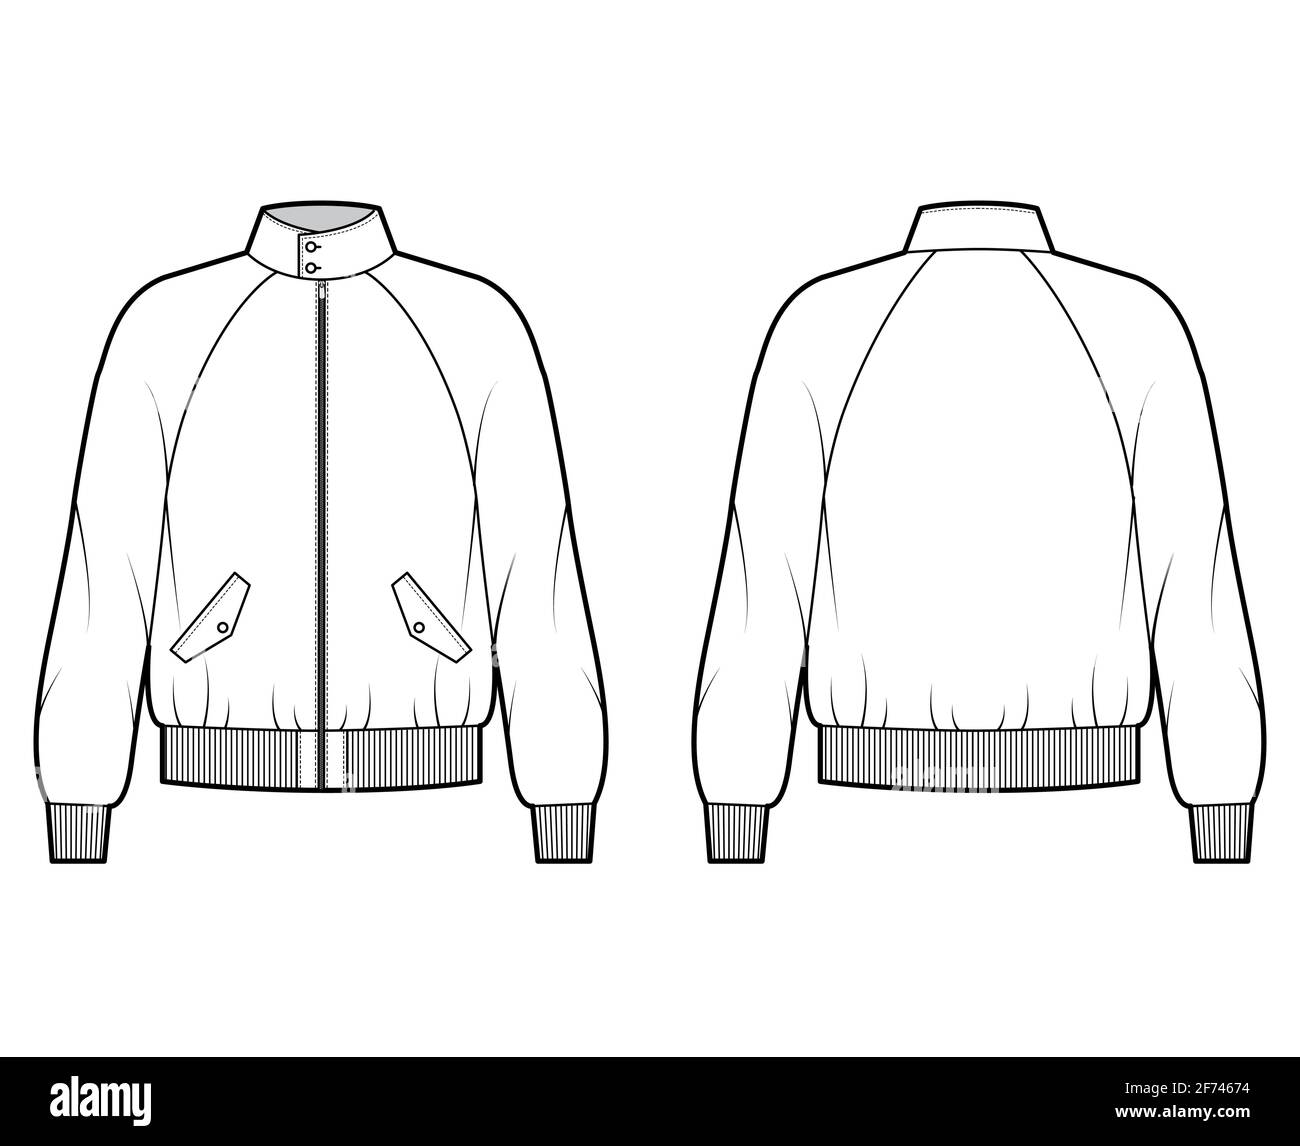 Zip-up Harrington Bomber jacket technical fashion illustration with Rib cuffs, oversized, long raglan sleeves, flap pockets. Flat coat template front, back white color. Women men unisex top CAD mockup Stock Vector